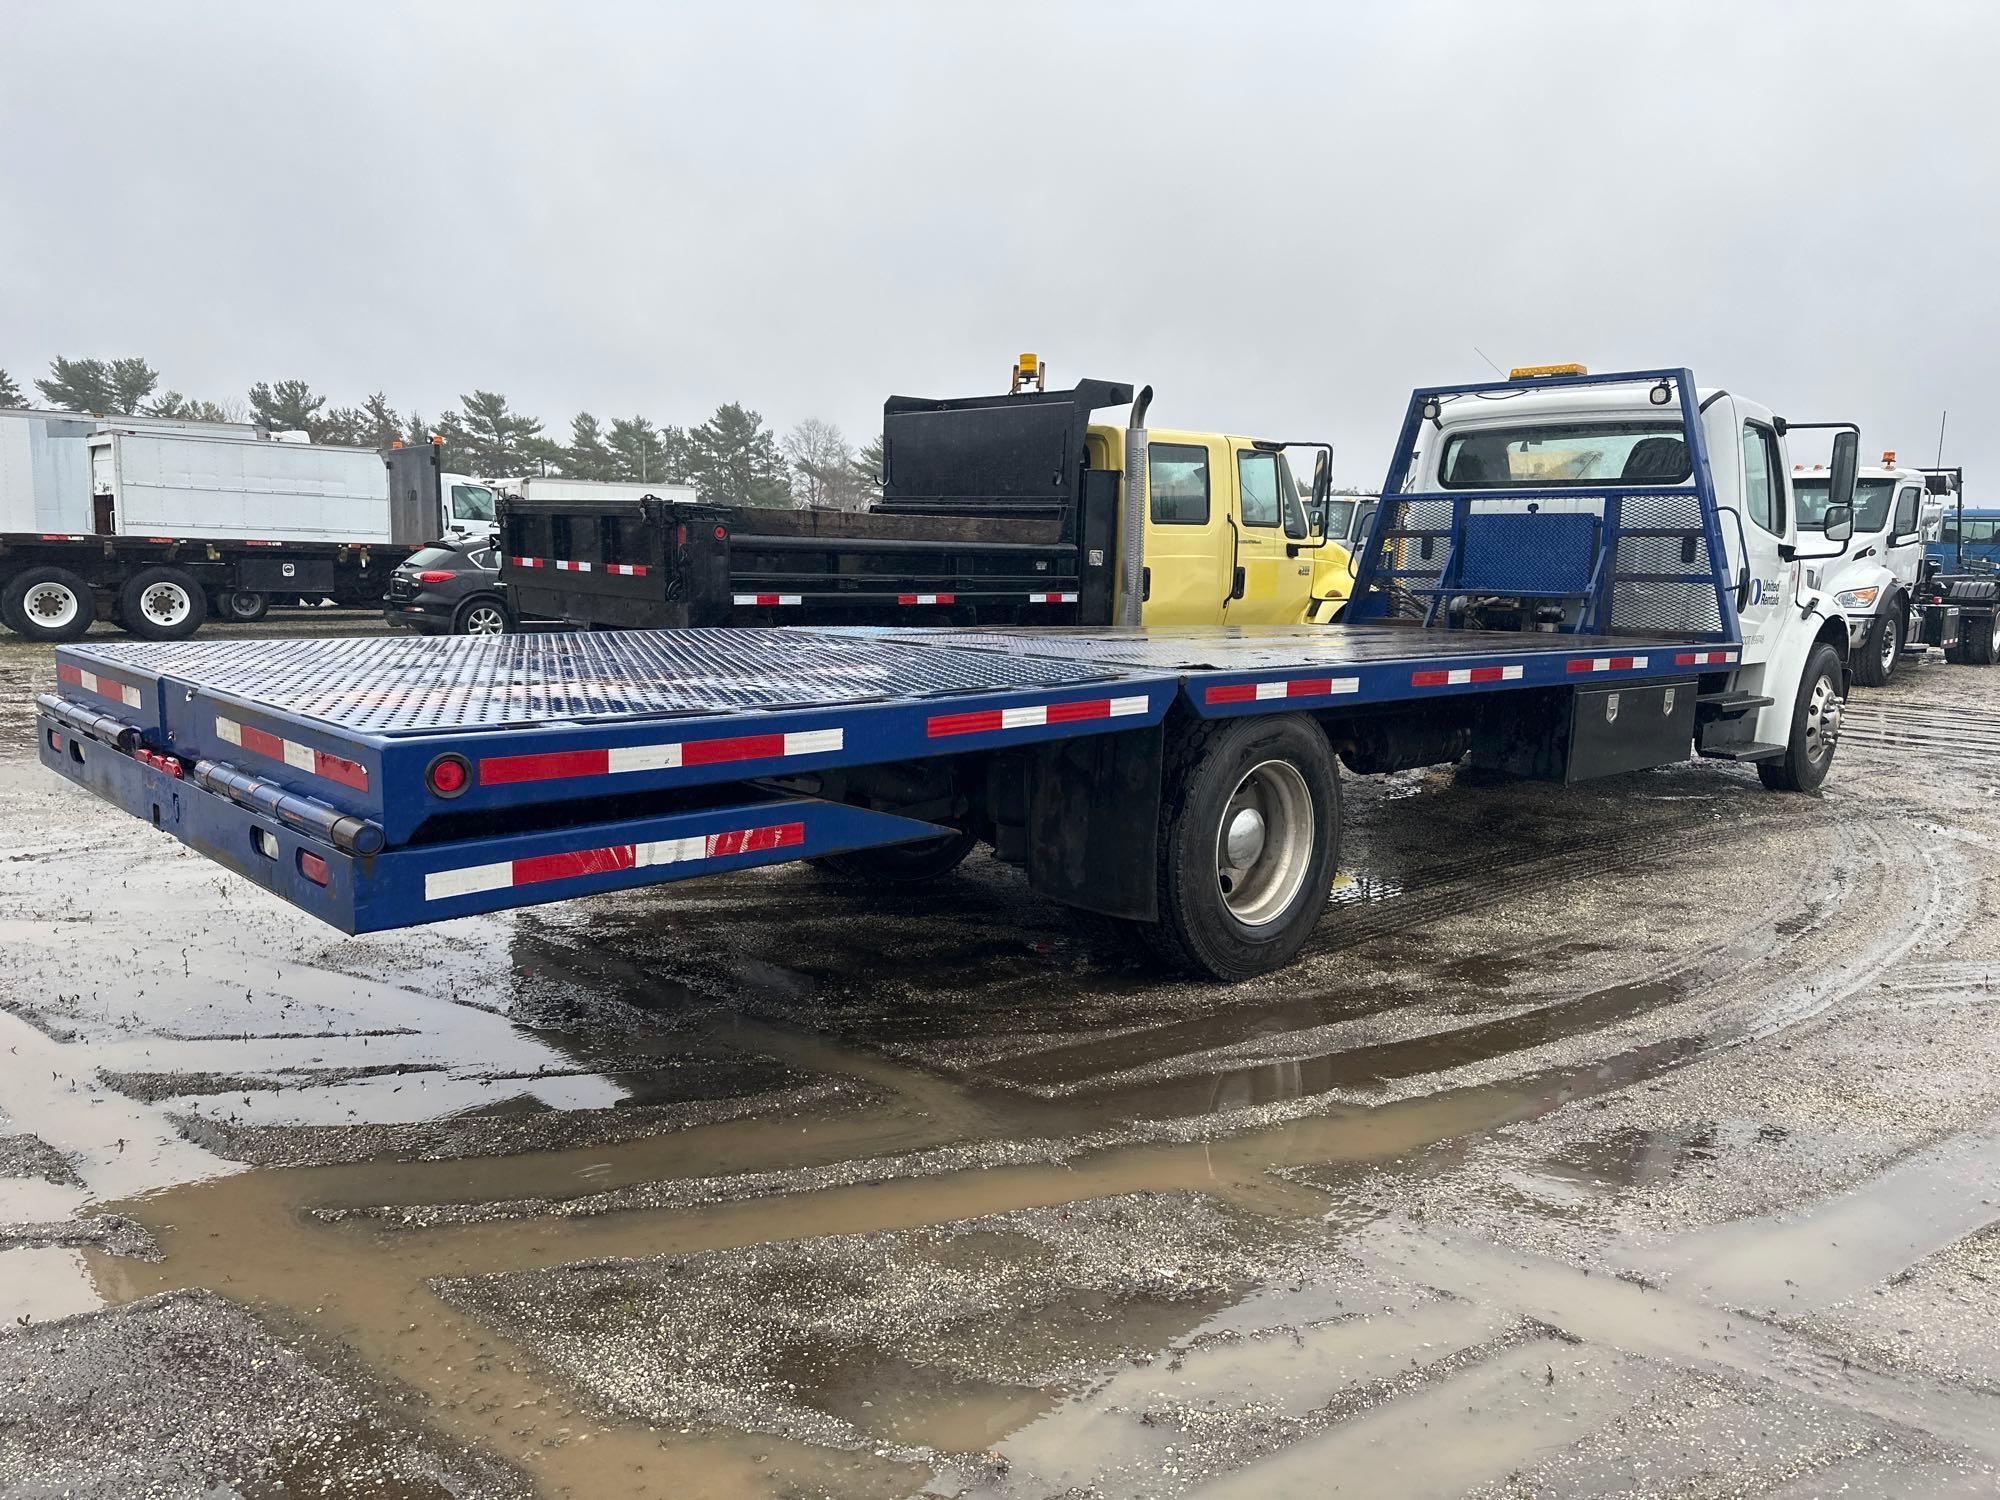 2016 FREIGHTLINER M2106 FLATBED TRUCK VN:1FVACXDT5GHHR1699 powered by diesel engine, equipped with